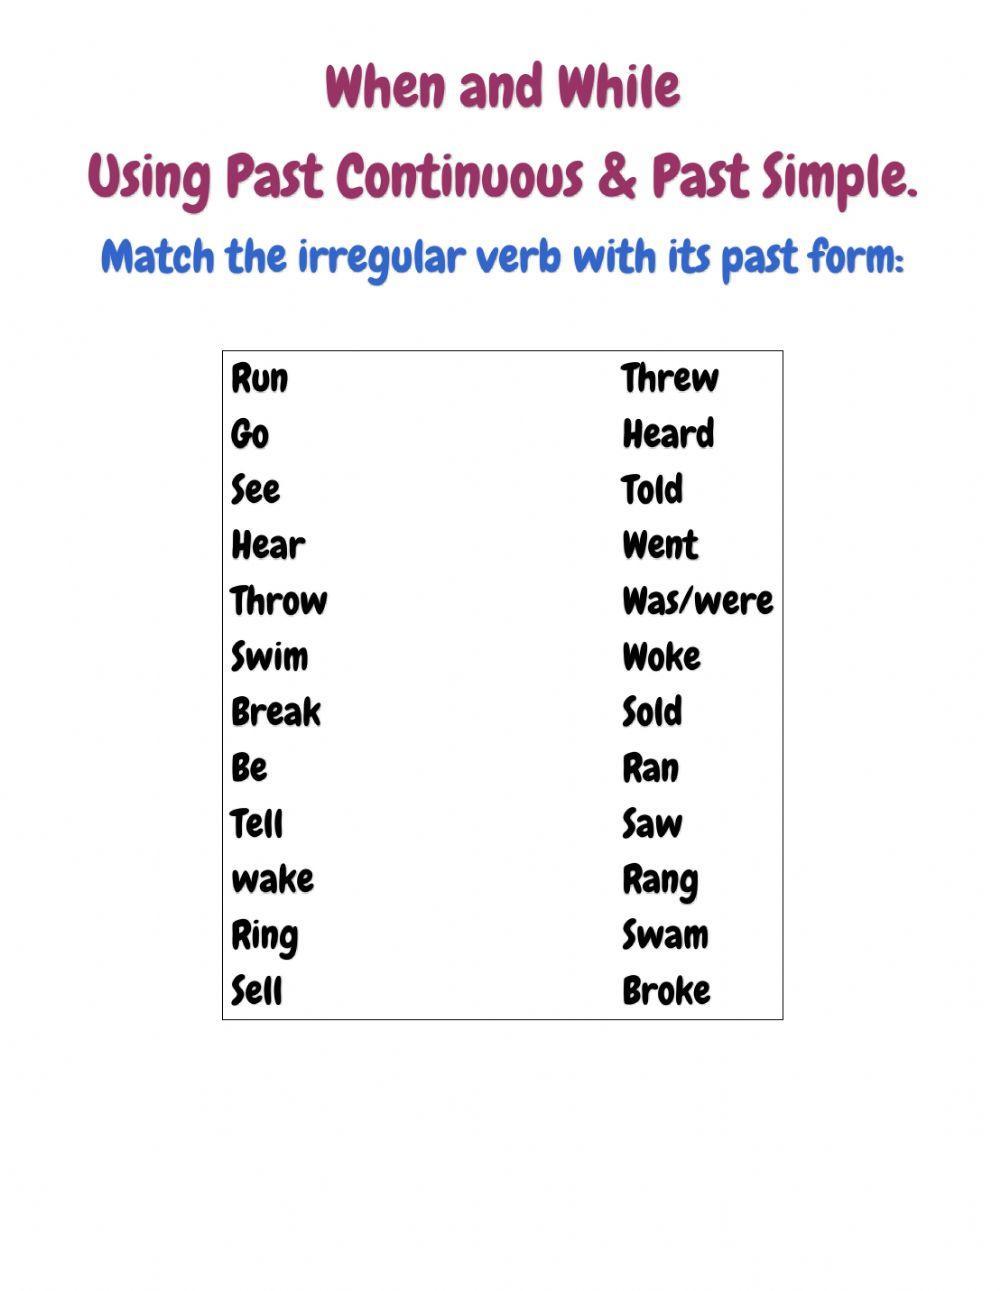 Past Tense Of Ring, Past Participle Form of Ring, Ring Rang Rung V1 V2 V3 -  Lessons For English